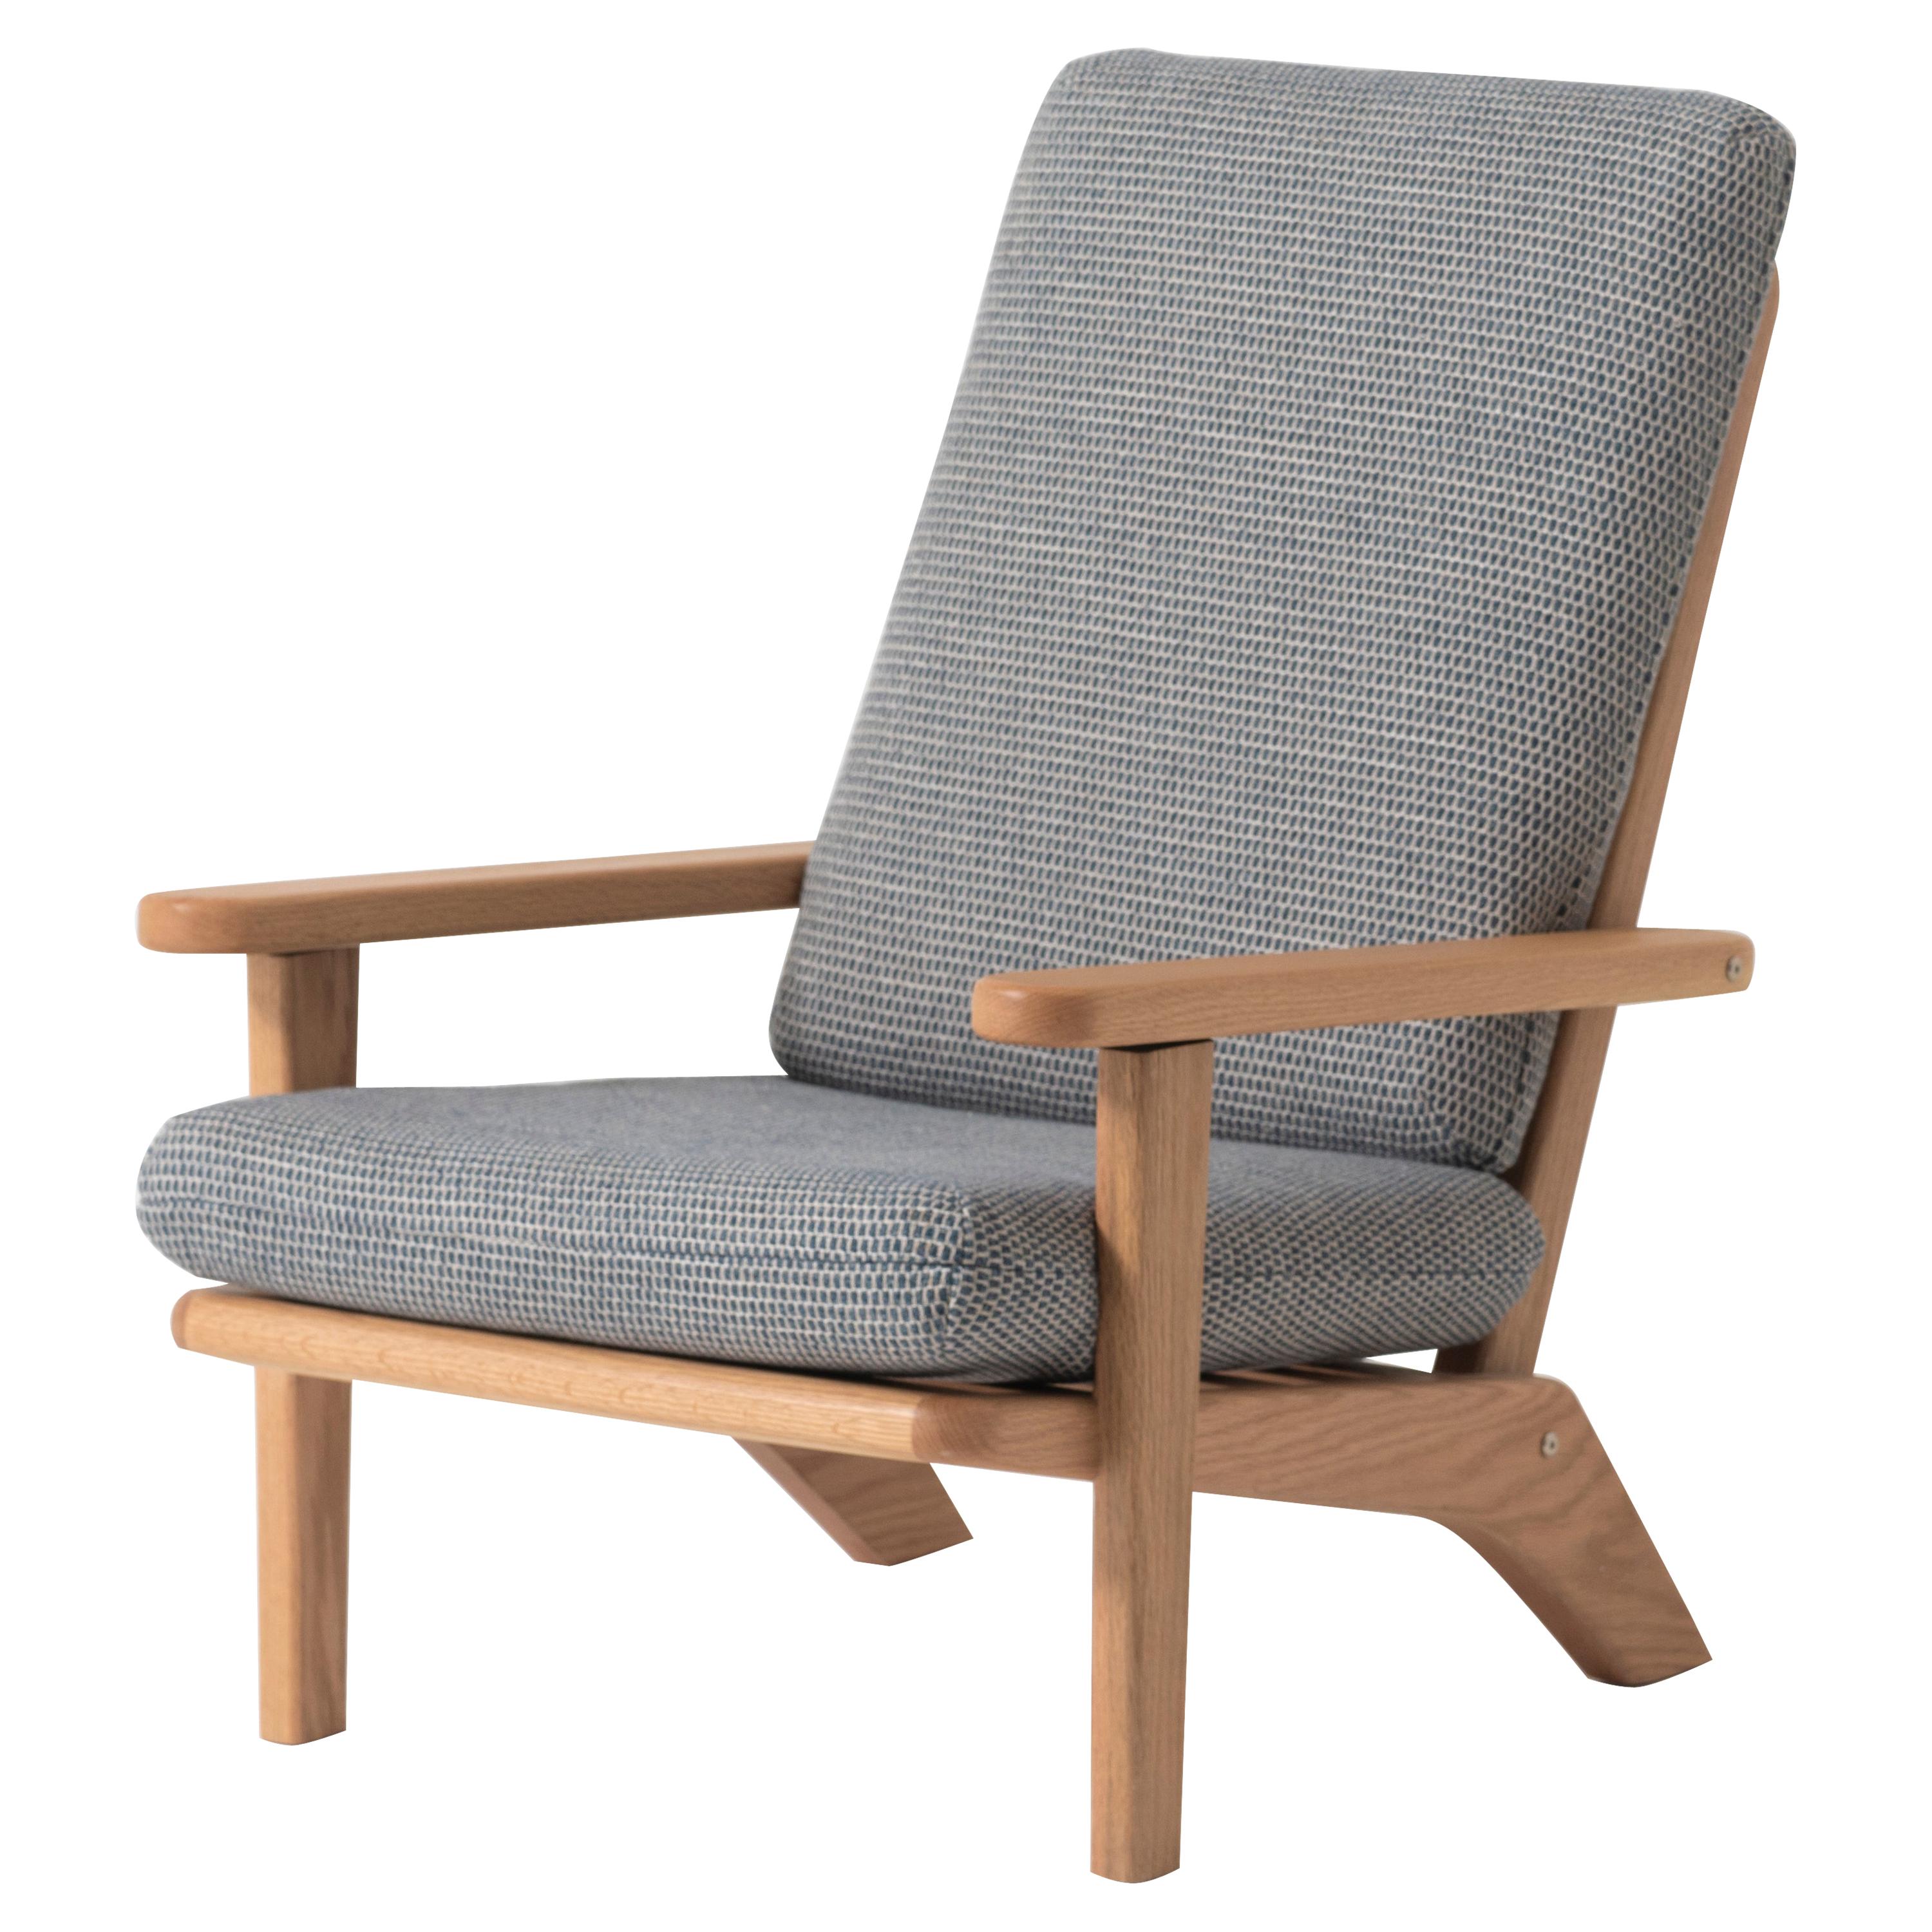 Lounge Chair in Solid Oak Wood with Gray Textile Cushion and Reclining Backrest